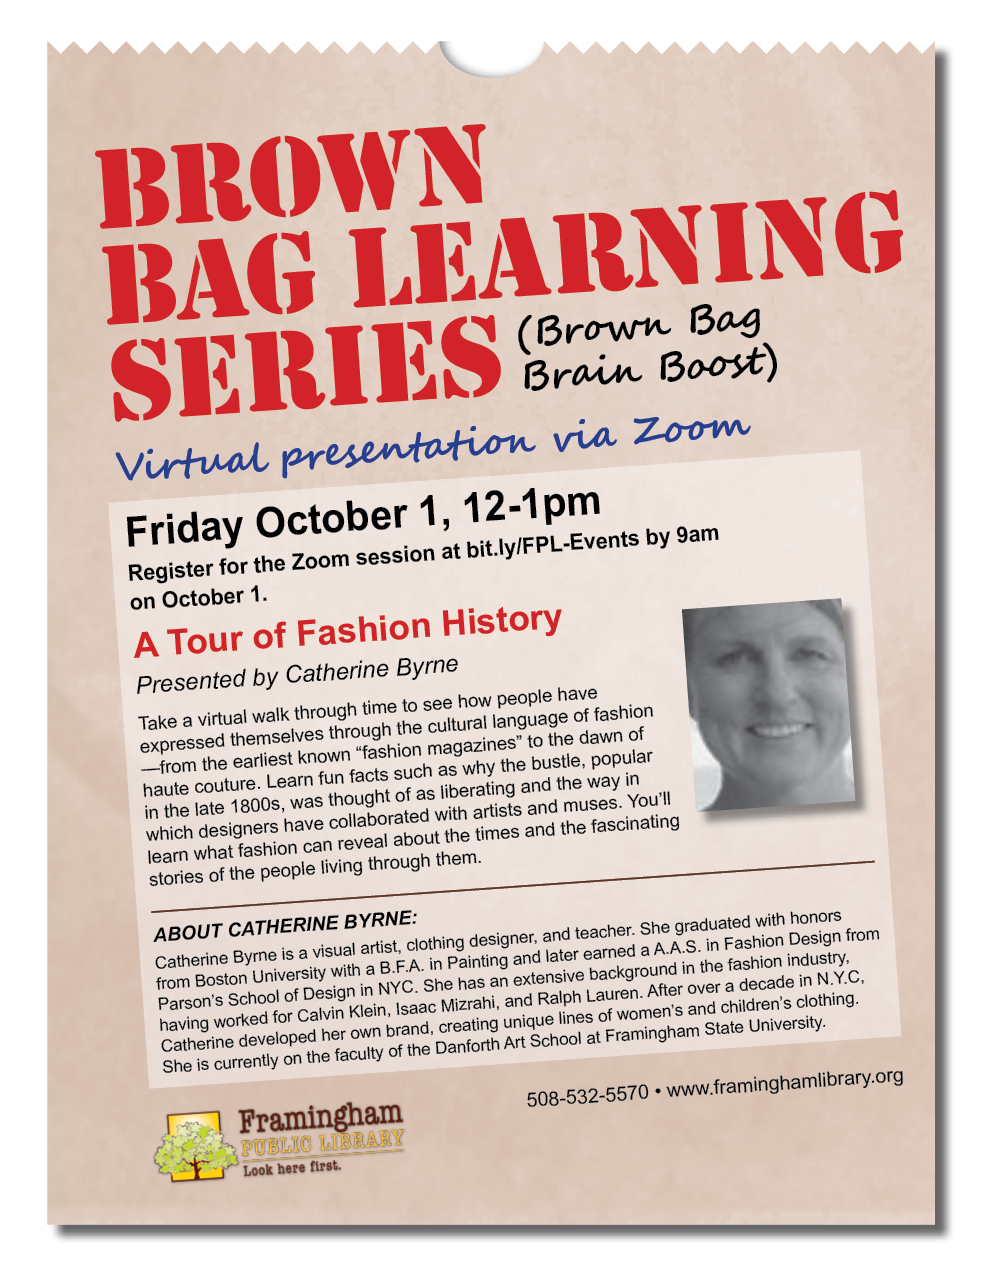 Brown Bag Learning Series: A Tour of Fashion History thumbnail Photo